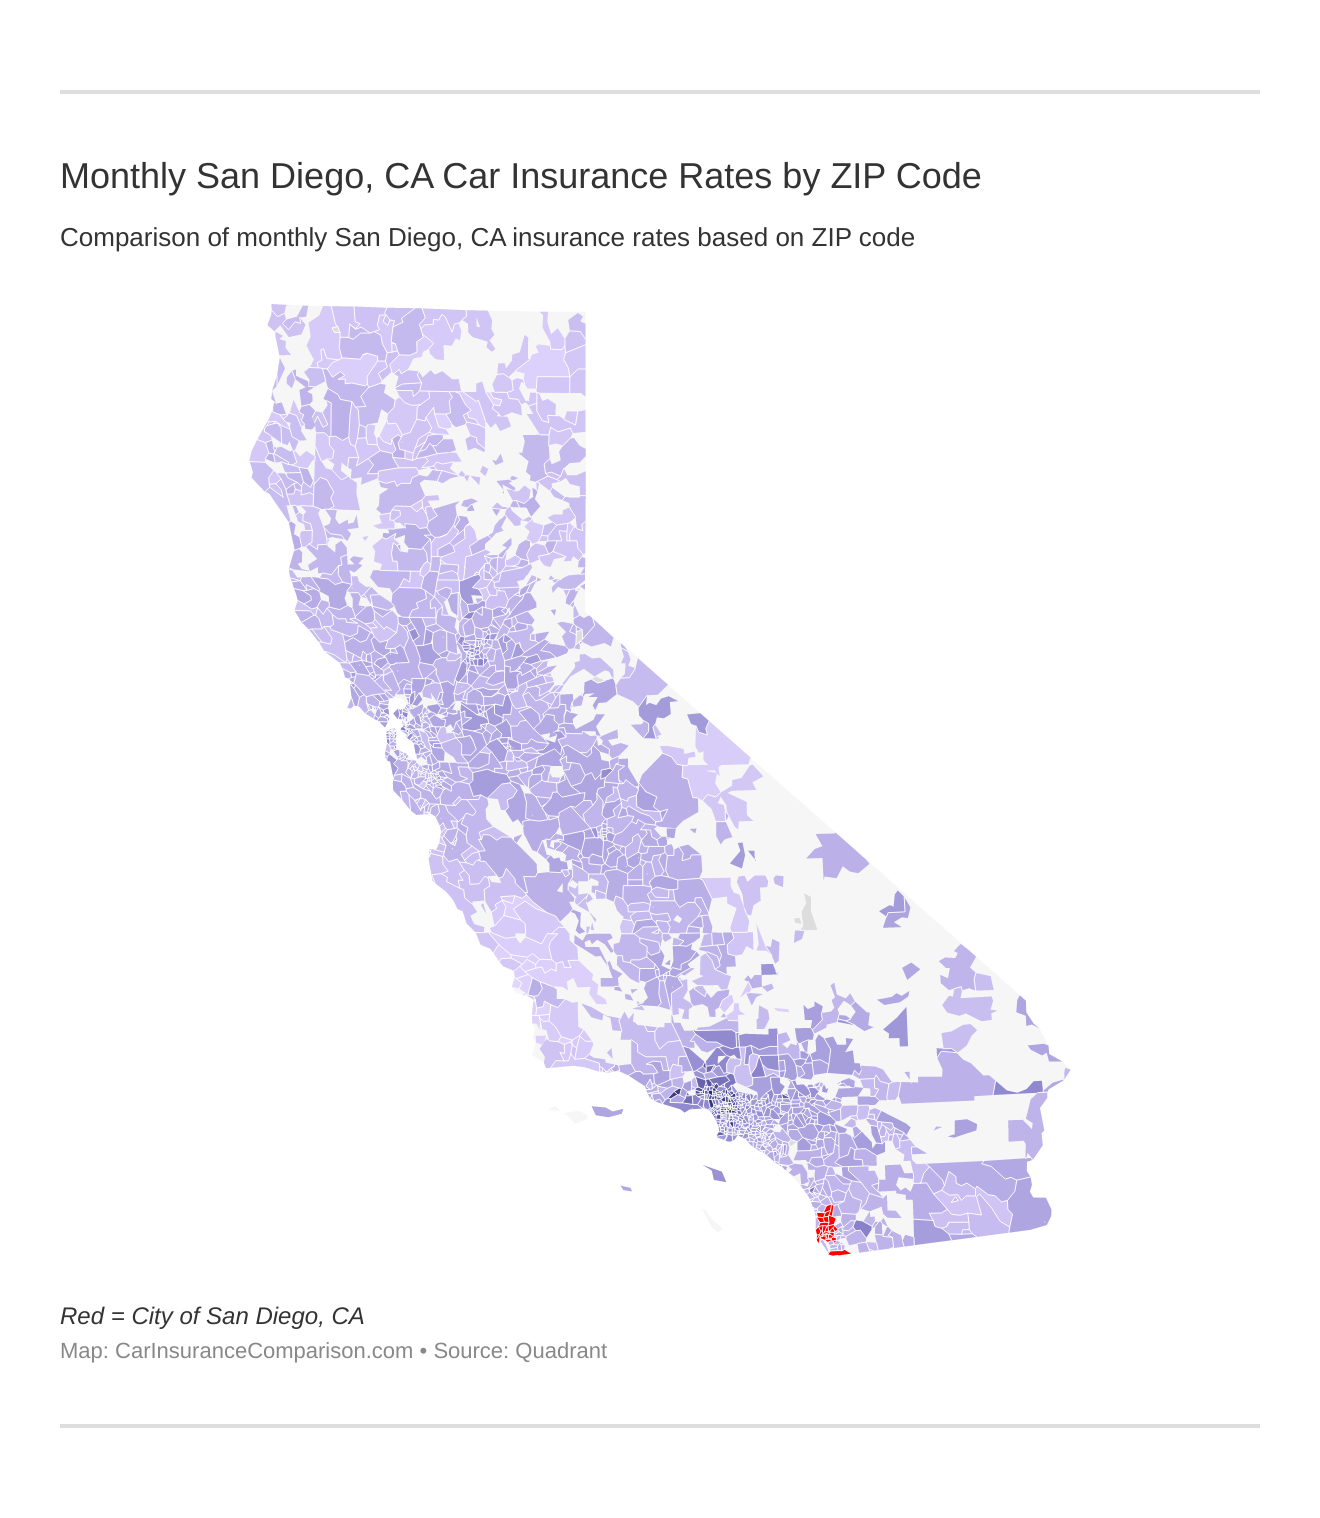 Monthly San Diego, CA Car Insurance Rates by ZIP Code